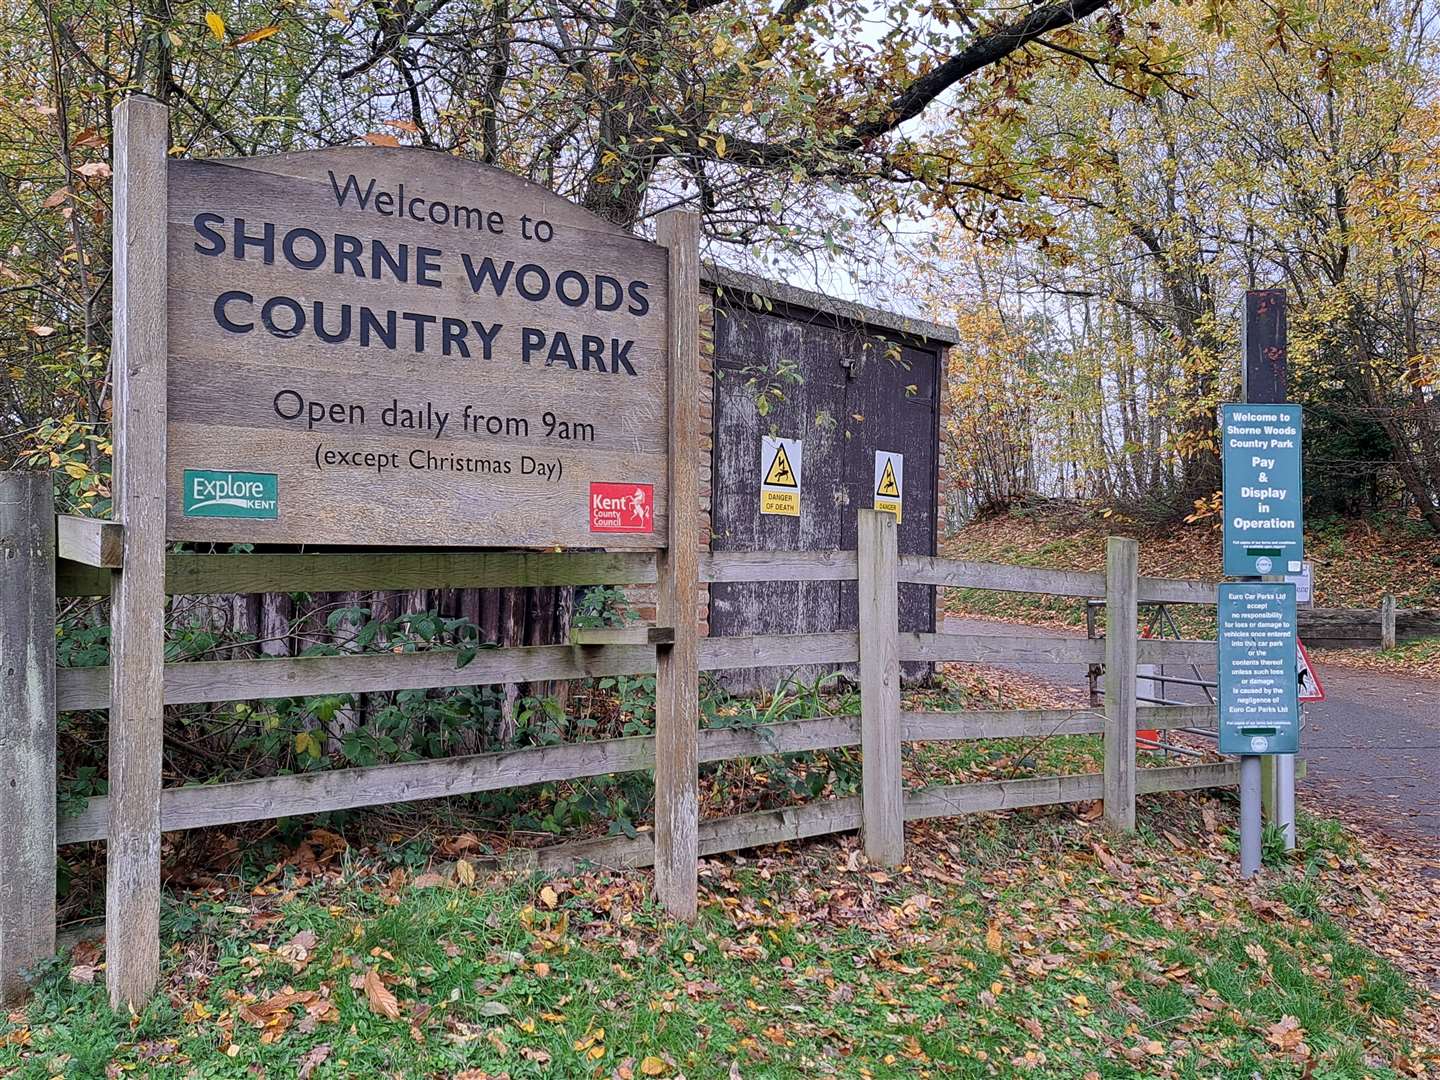 Enjoy a day in the great outdoors this January at Shorne Woods Country Park